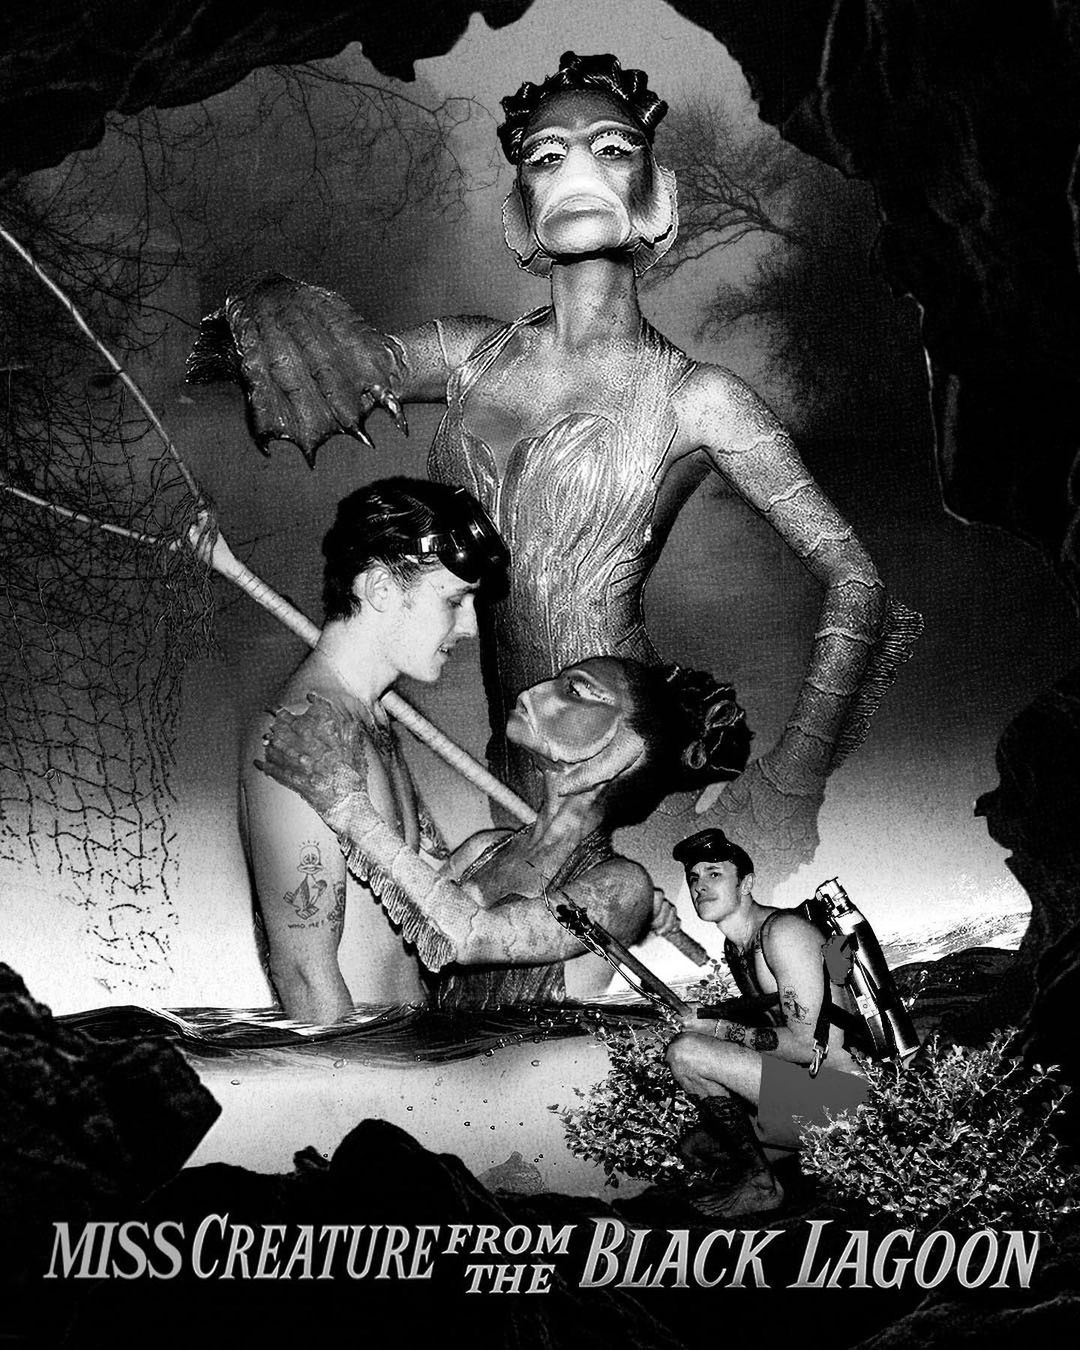 Photos n°1 : Ariana Grande is the Creature from the Black Lagoon!